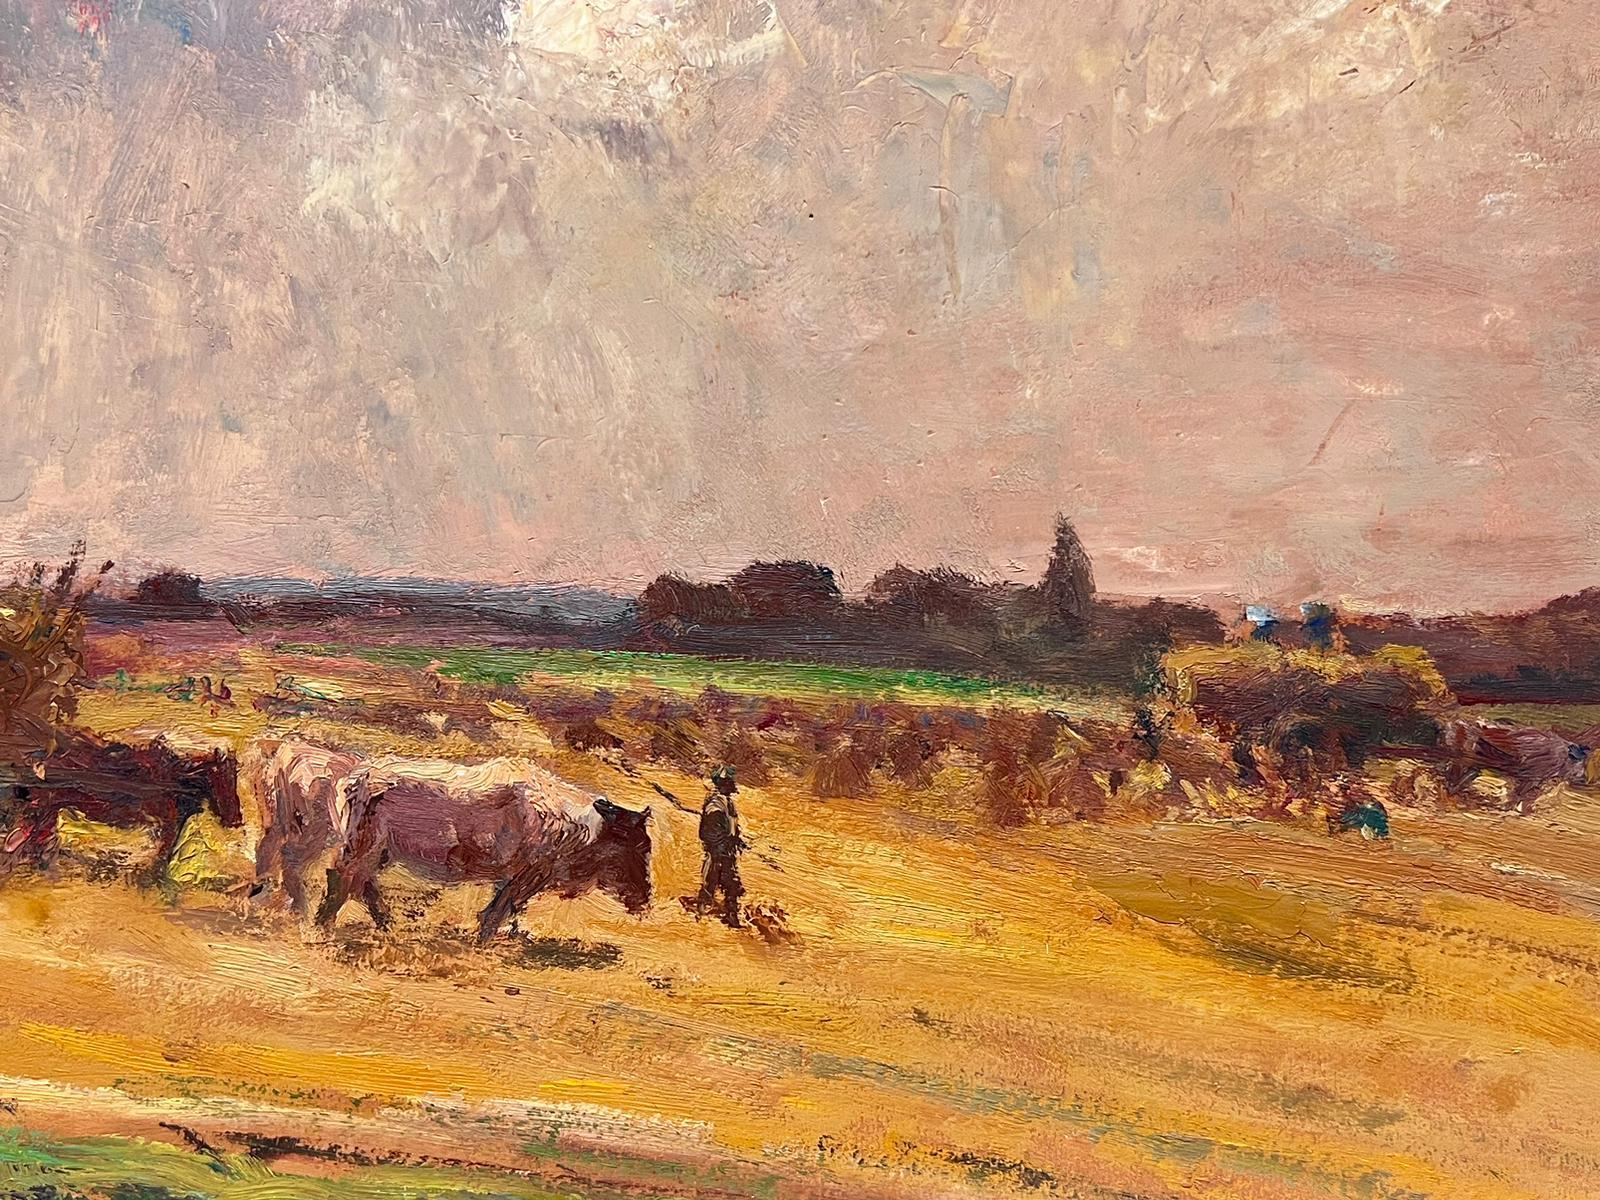 Artist/ School: Leon Hatot (French 1883-1953)

Title: Impressionist oil painting 

Medium: signed oil painting on thick paper, stuck on board unframed.

Size: painting: 12 x 19.5 inches

Provenance: all the paintings we have for sale by this artist